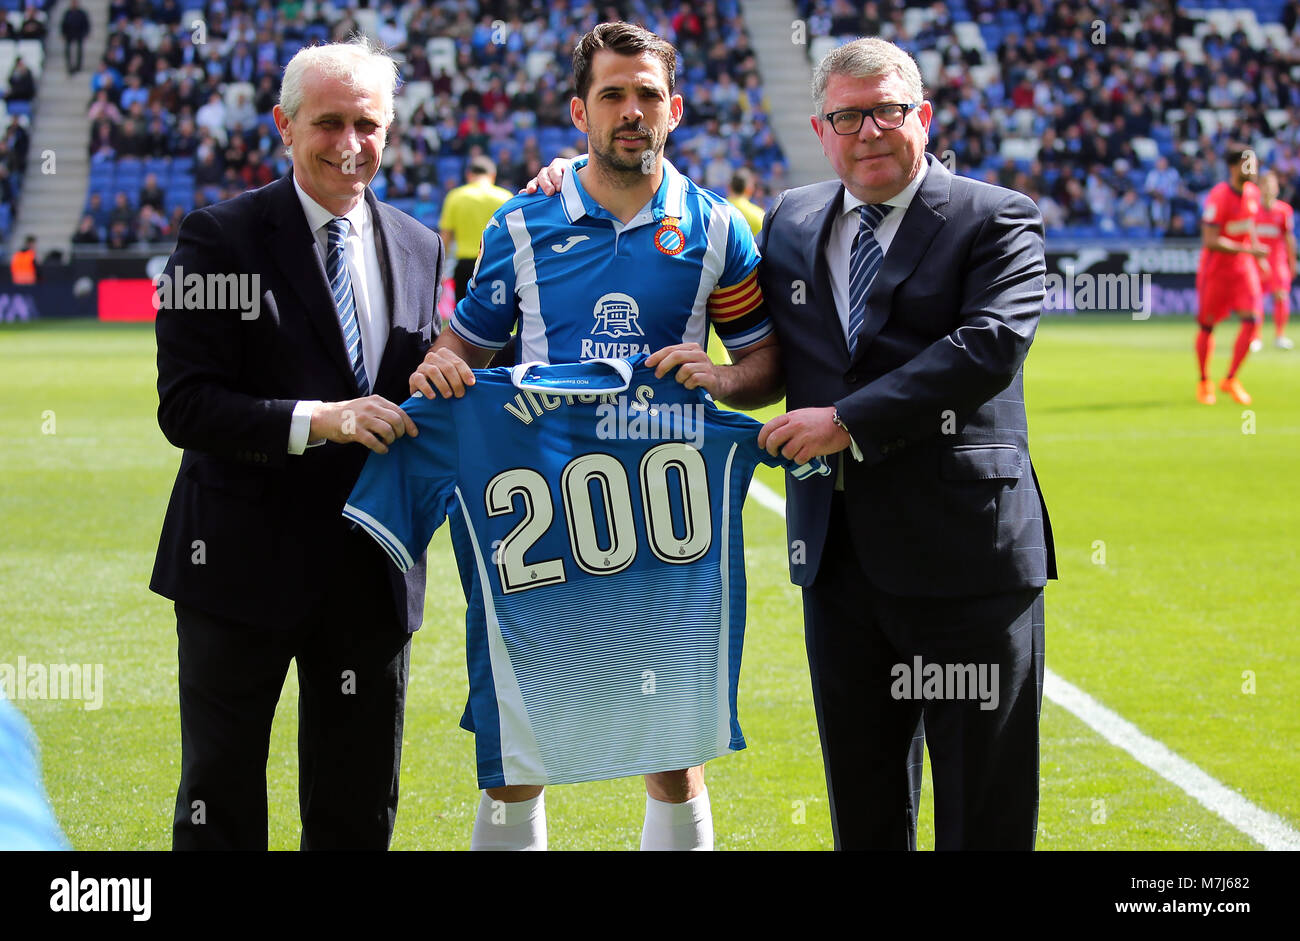 math 200 for Victor Sanchez during the match between RCD Espanyol and Real Sociedad, on 11th March 2018, in Barcelona, Spain. Credit: Gtres Información más Comuniación on line, S.L./Alamy Live News Stock Photo